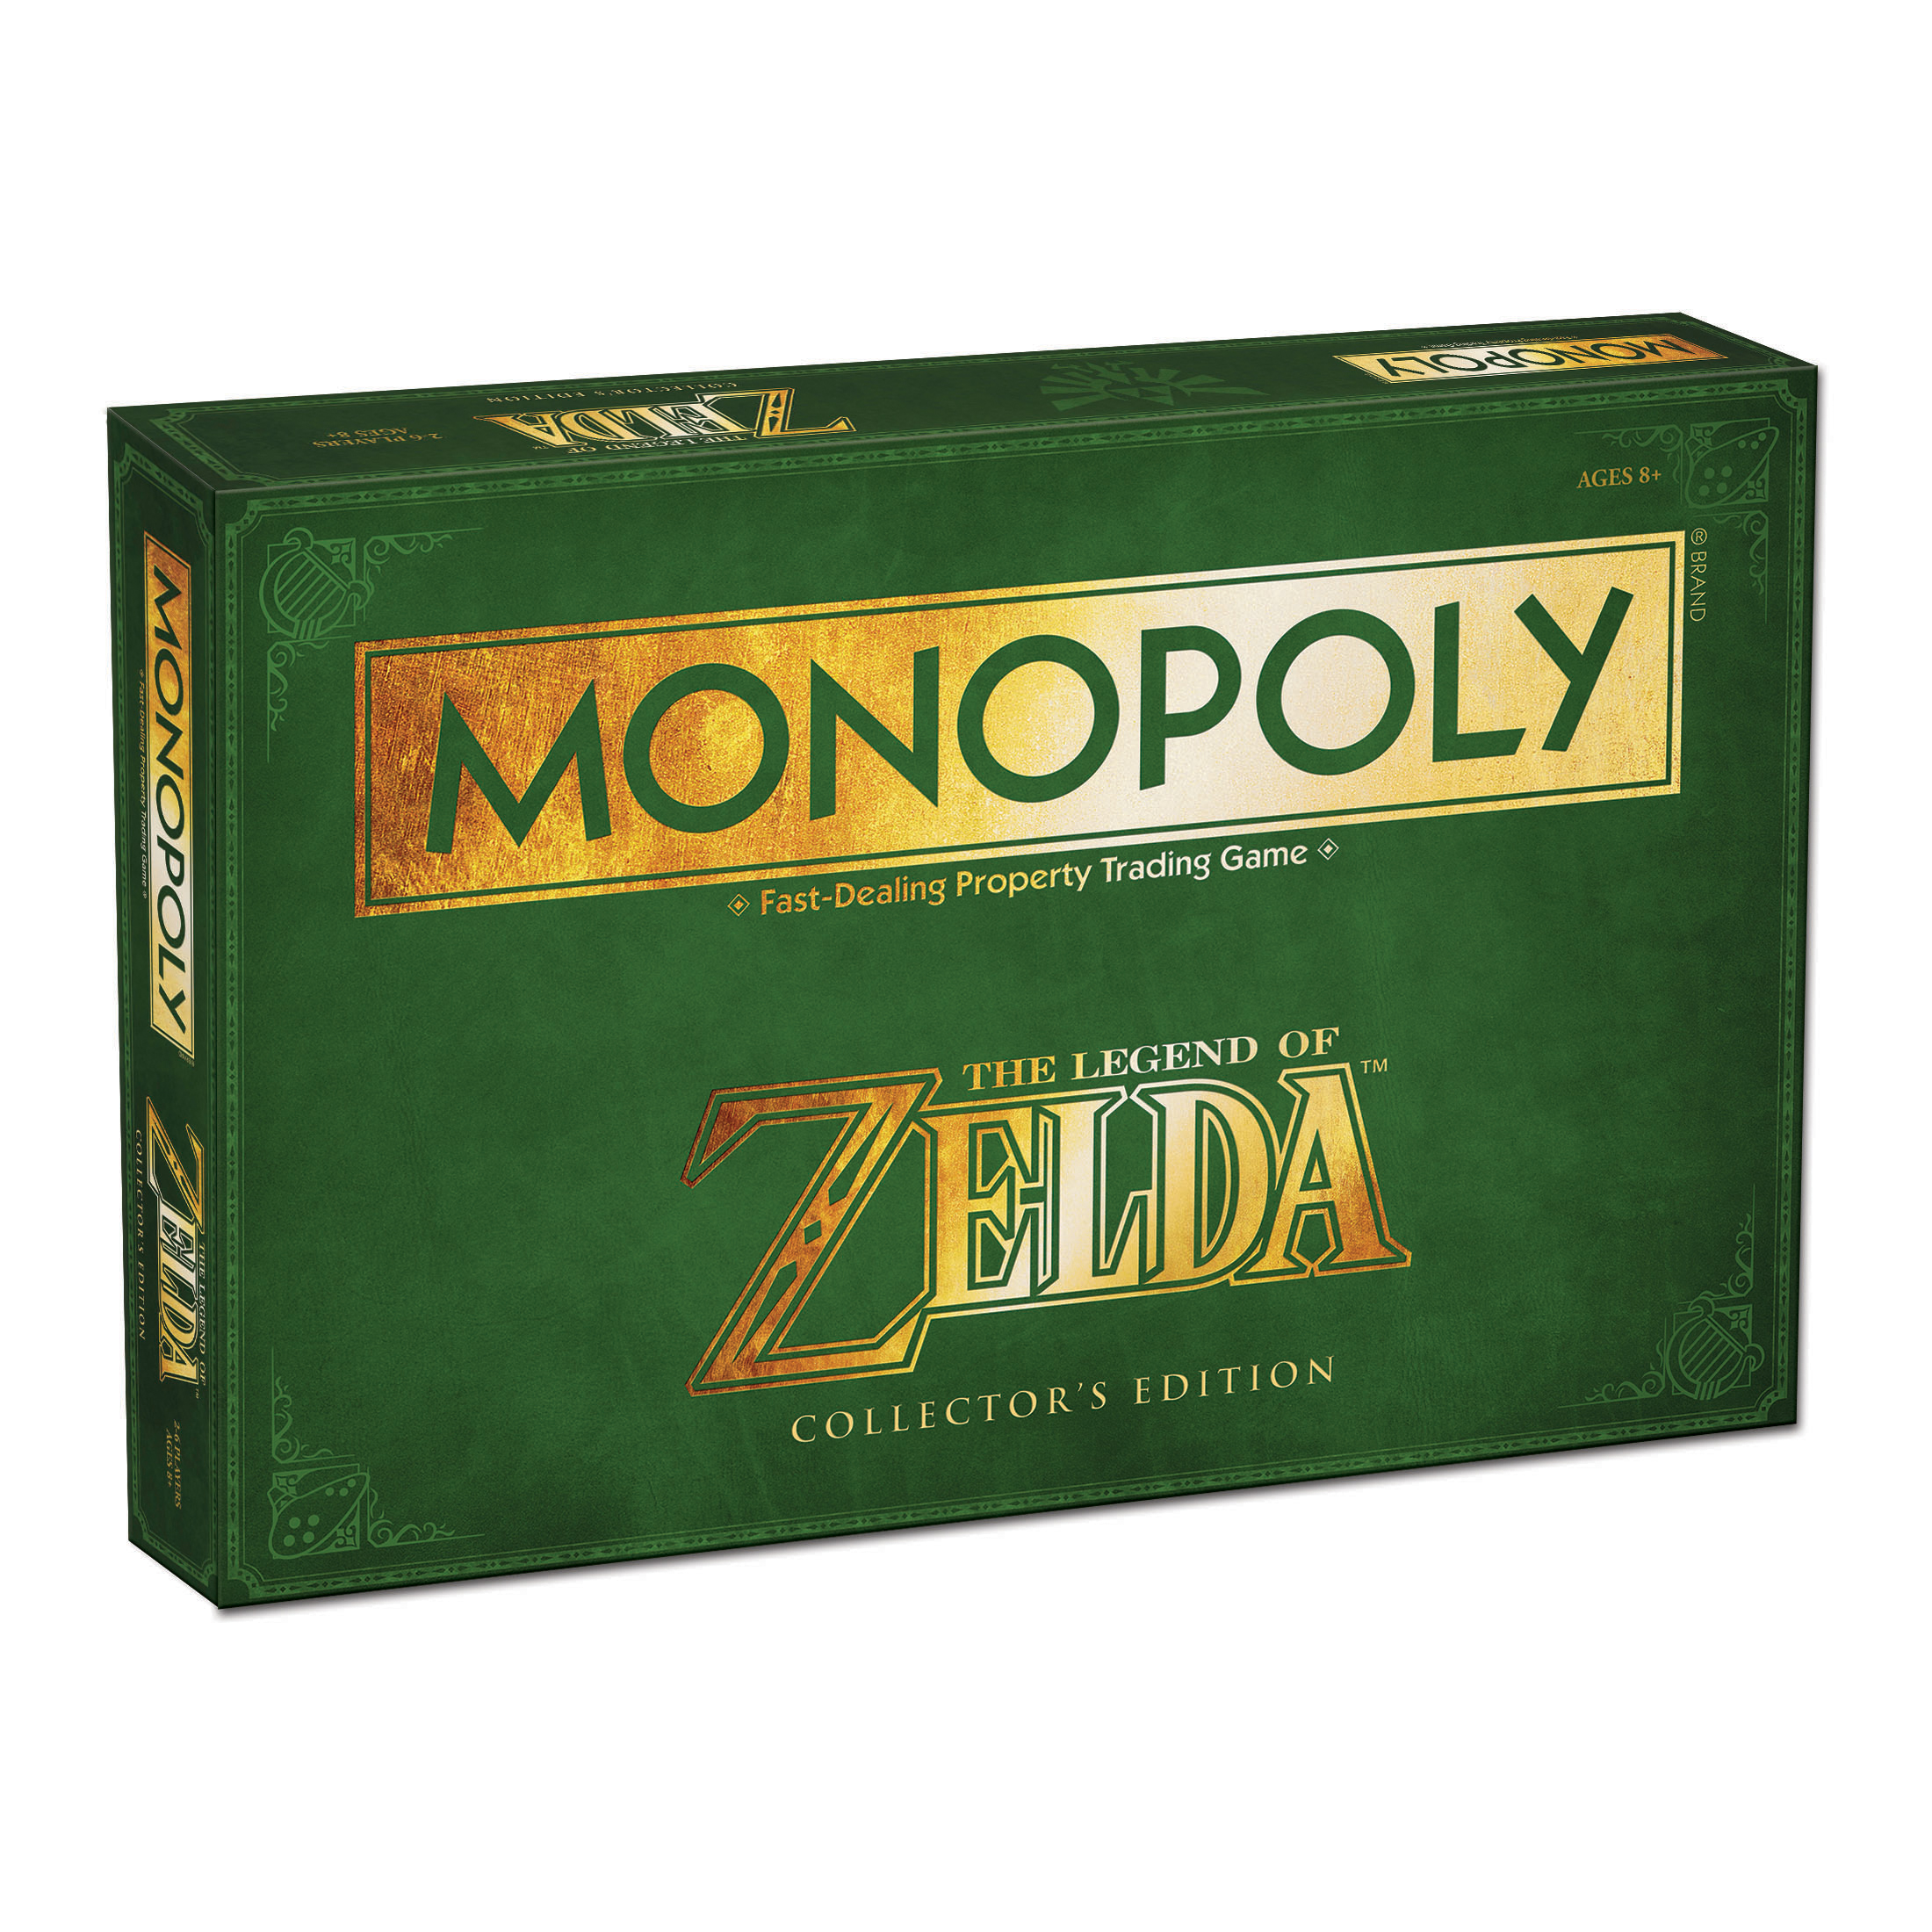 USAopoly Monopoly - The Legend of Zelda Collector's Edition